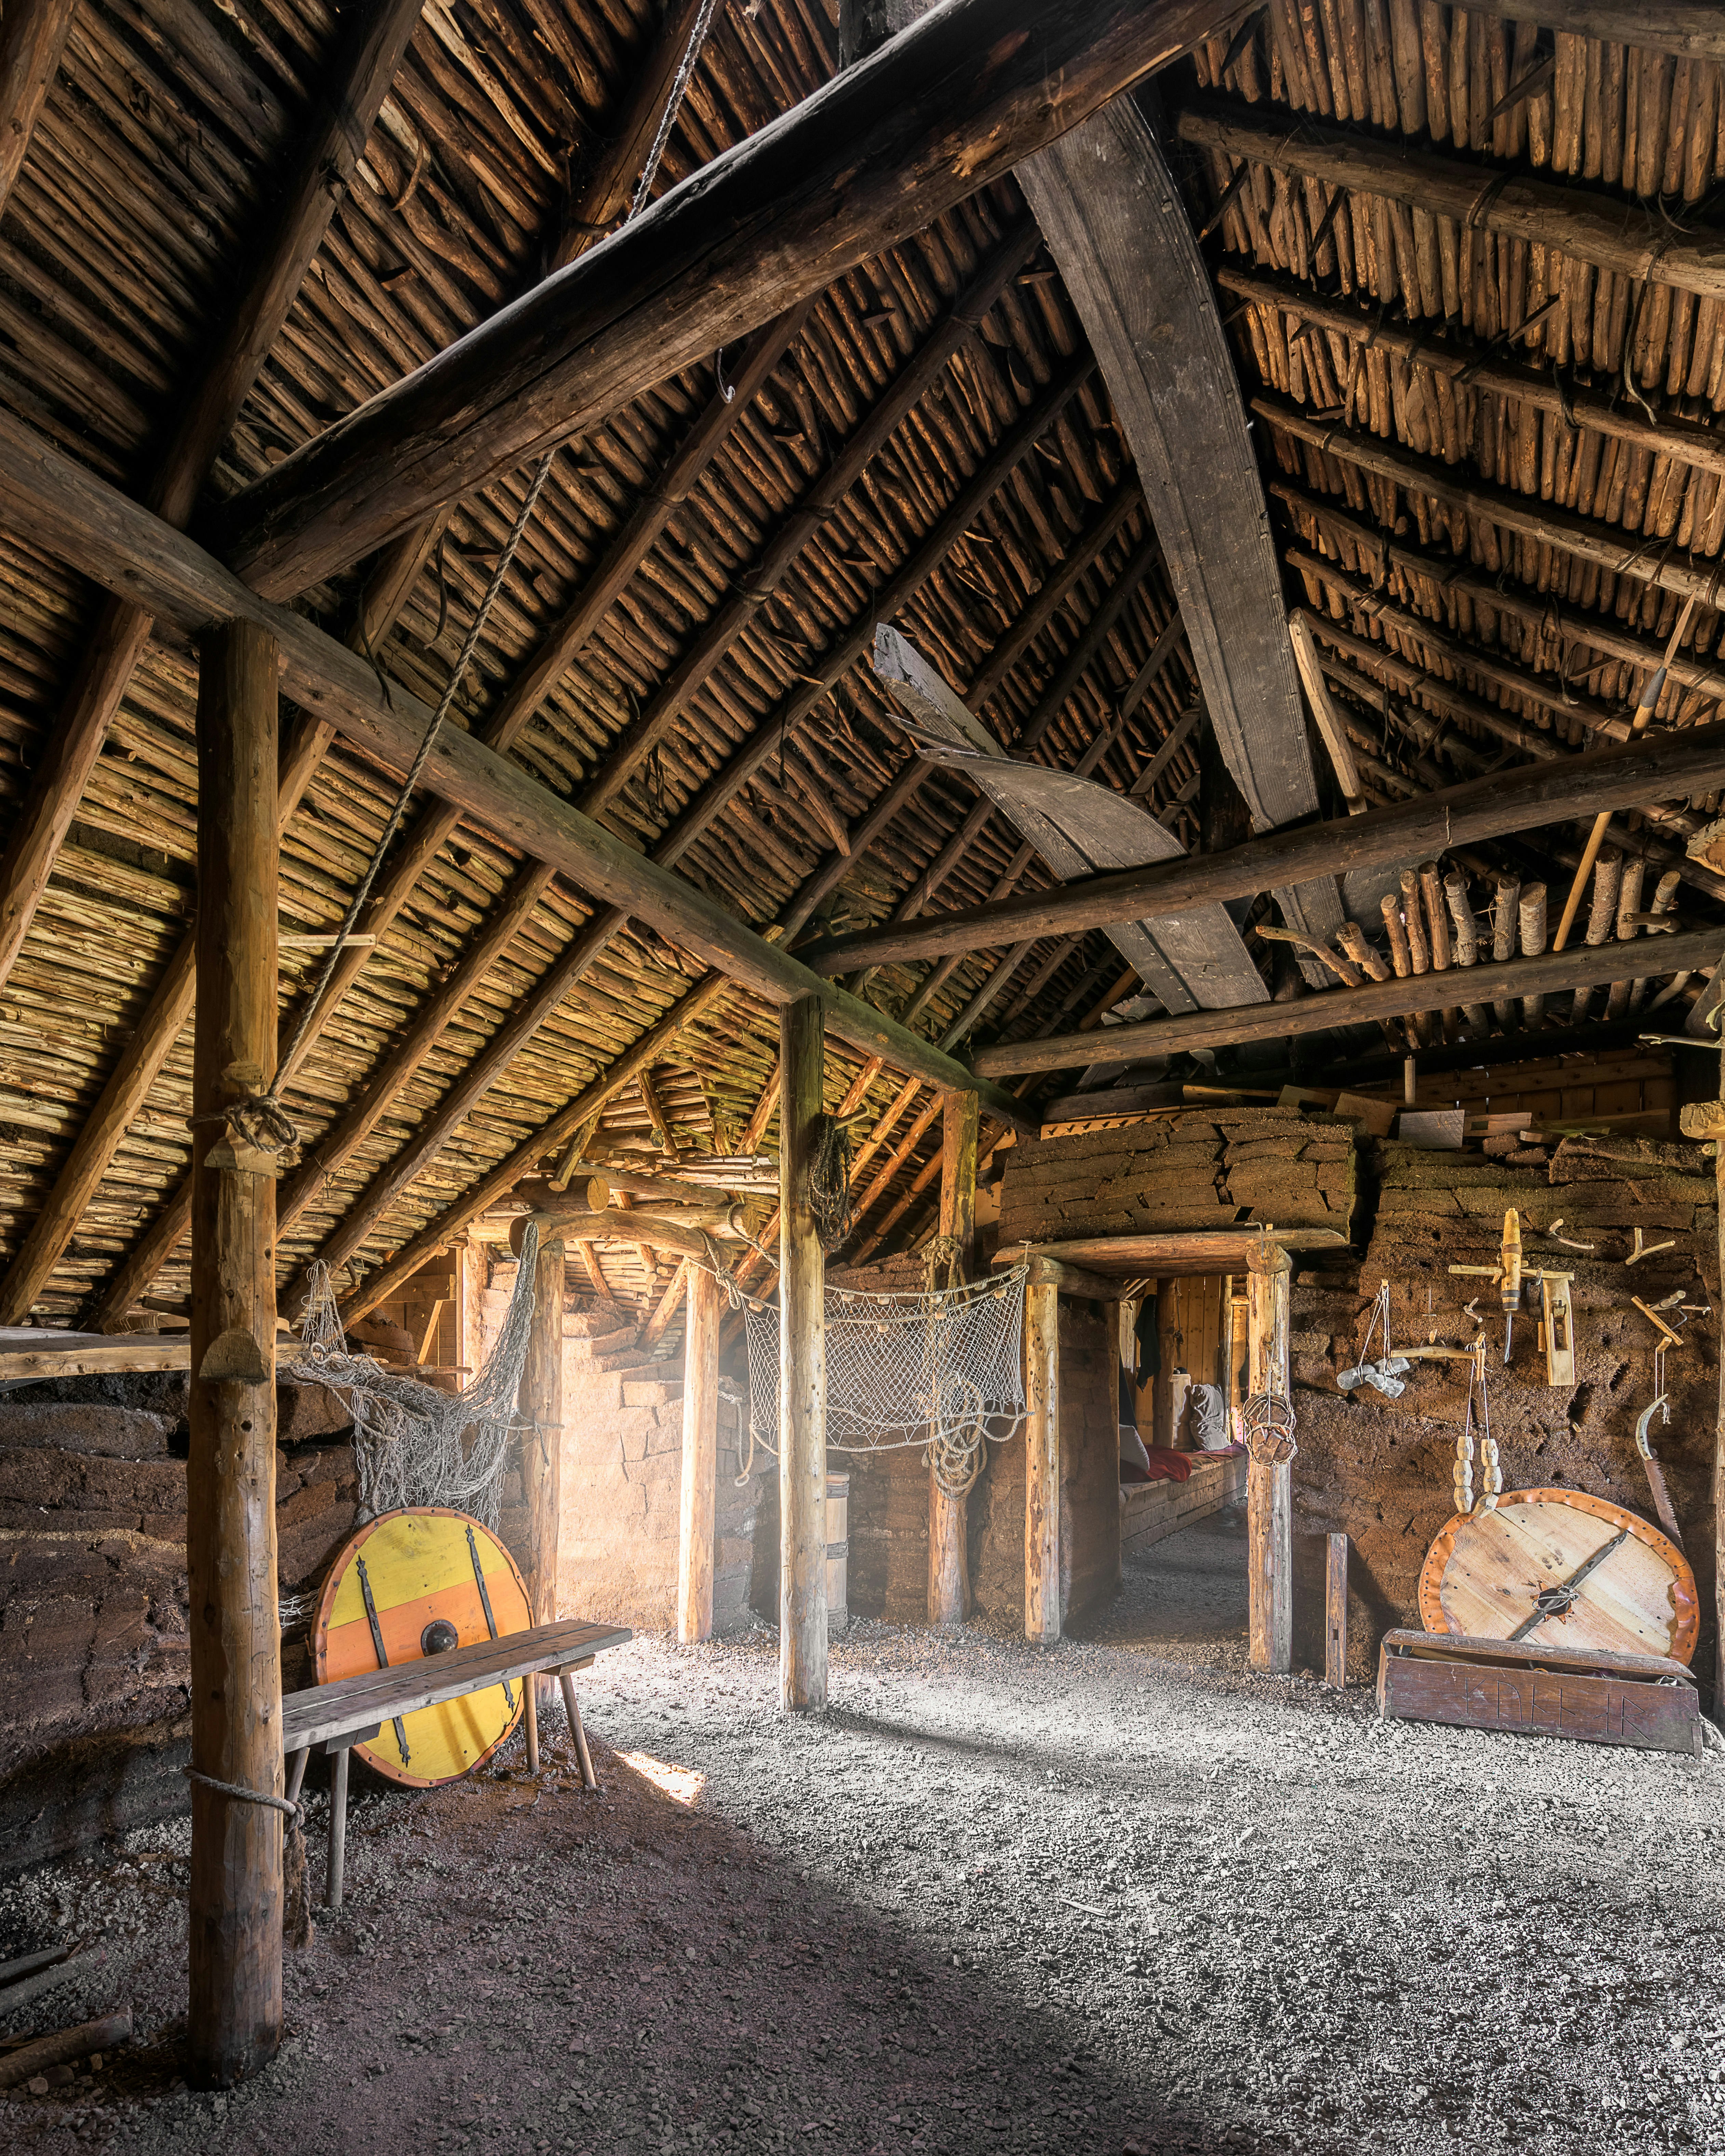 Interior of a wooden structure with a dirt floor and circular shields